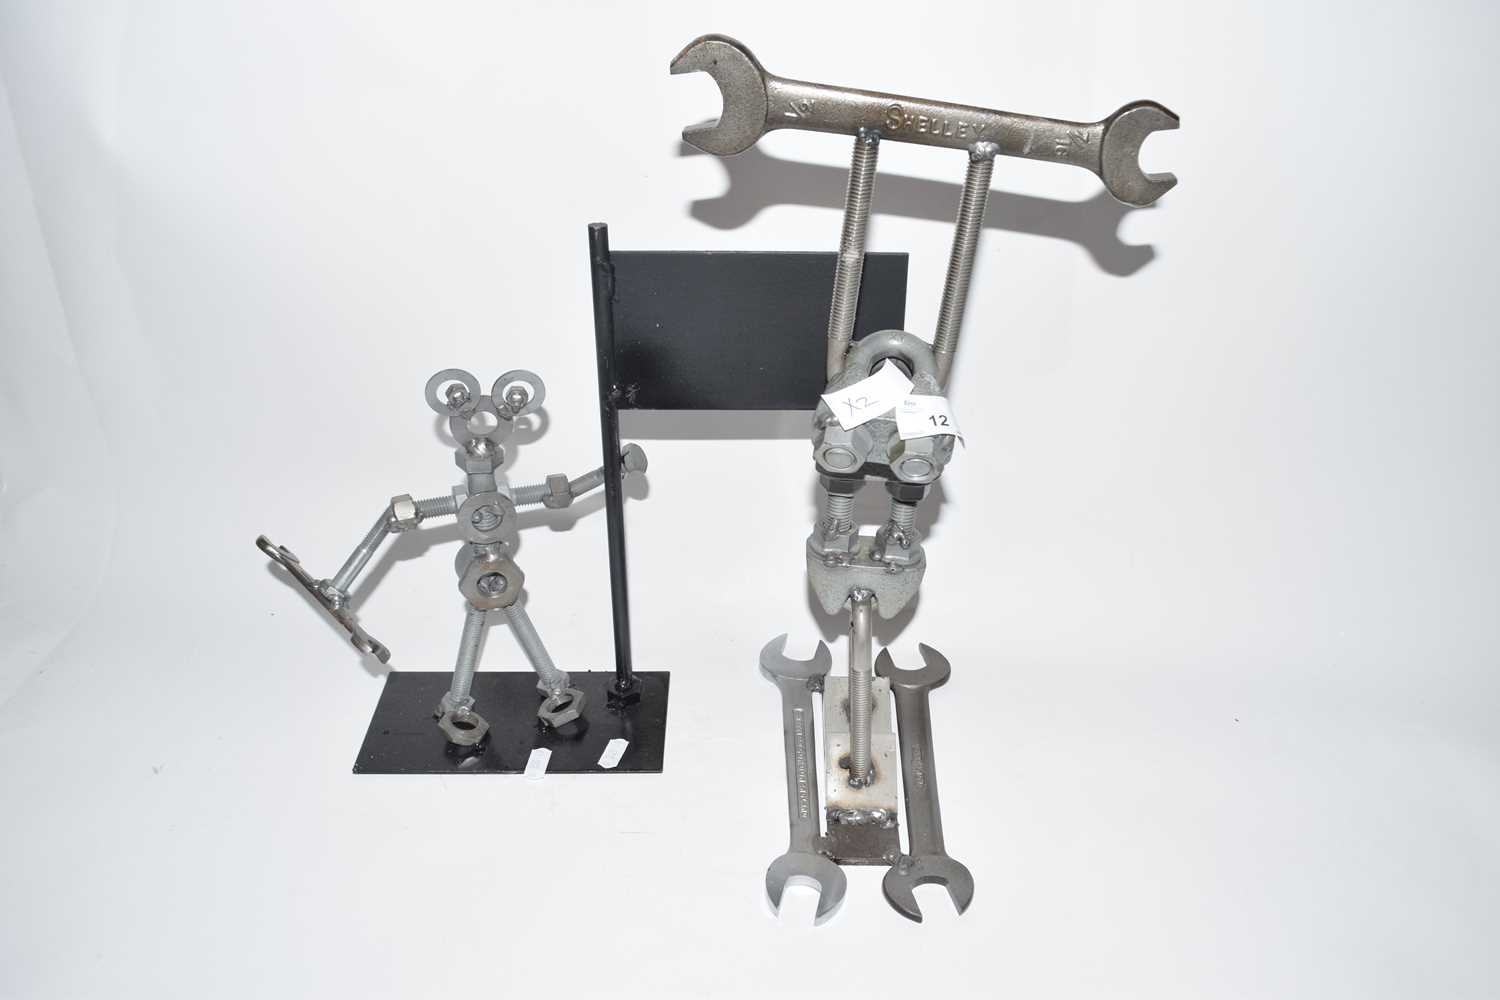 Two novelty metal figures formed from spanners, bolts, nuts and other metal items